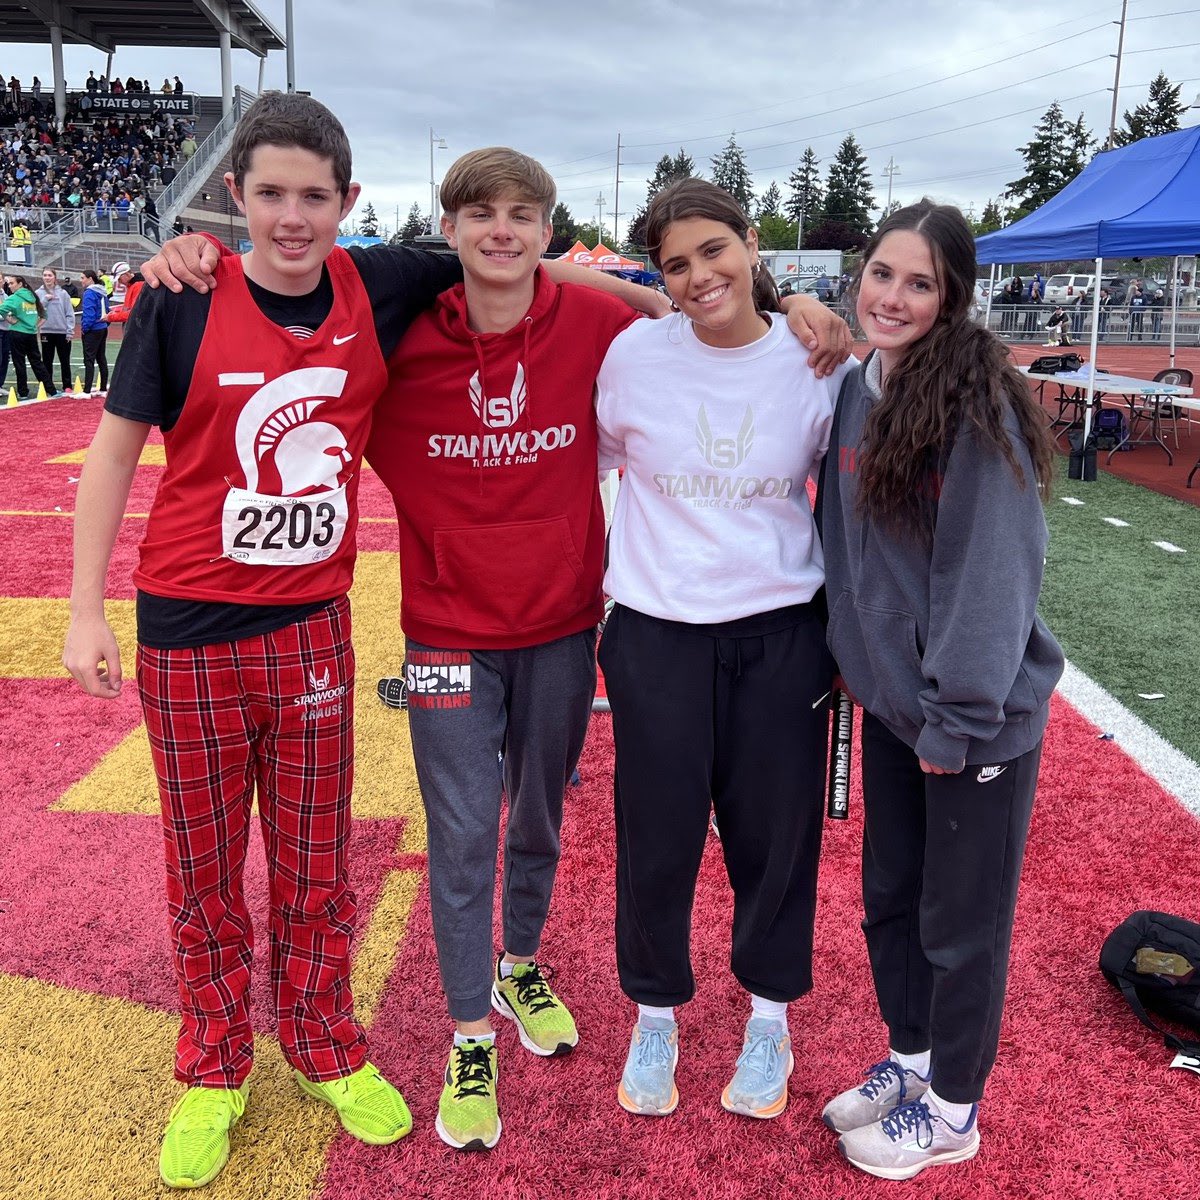 Our Spartan Unified Sprint Medley Relay team of Addison Morton, Xander Krause, Amelia Allen, and Levi Stiers placed 6th at State and set our inaugural school record of 2:01.96! ⭐️ @Stanwood_TF #GoSpartans